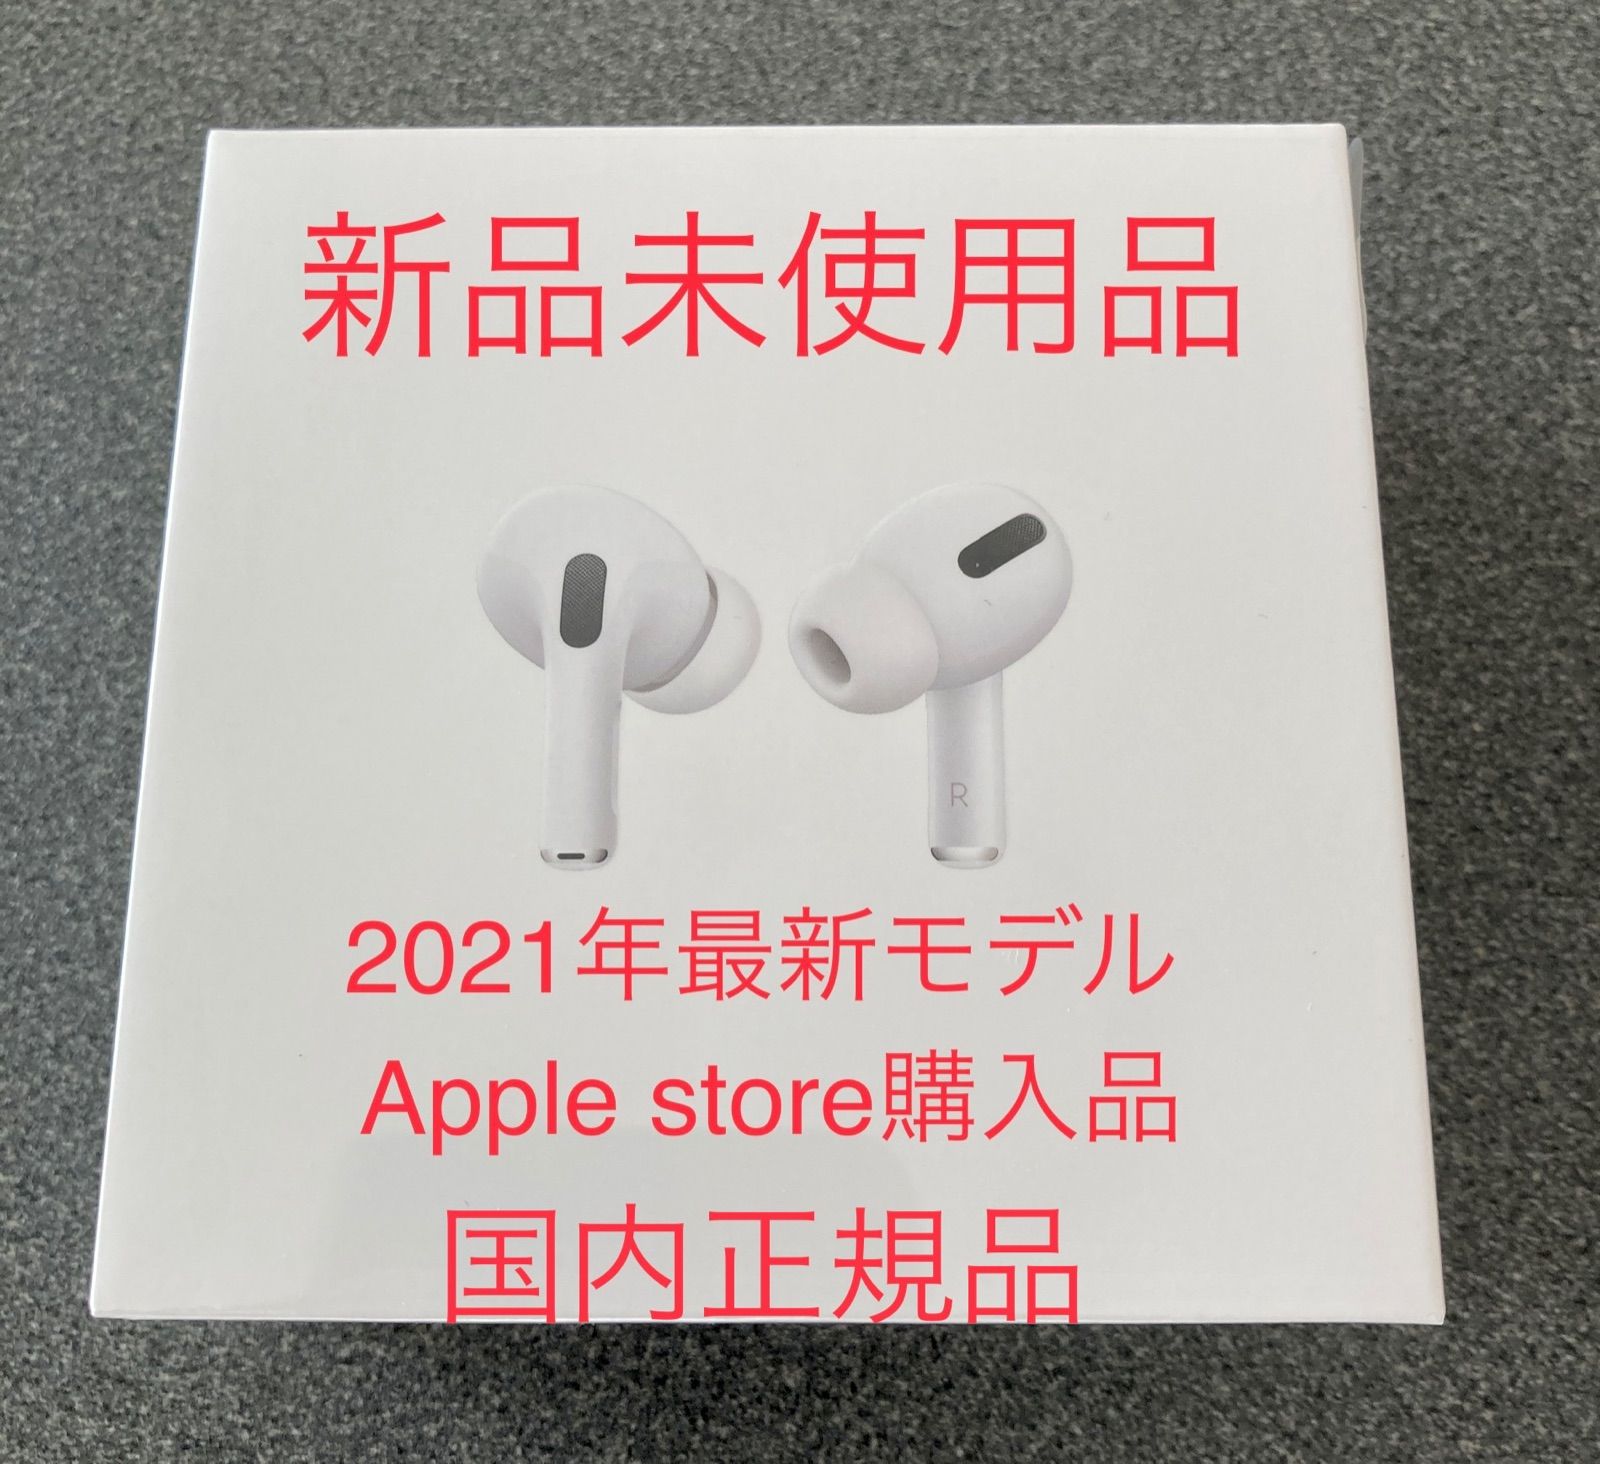 AirPods Pro 正規品　apple store購入